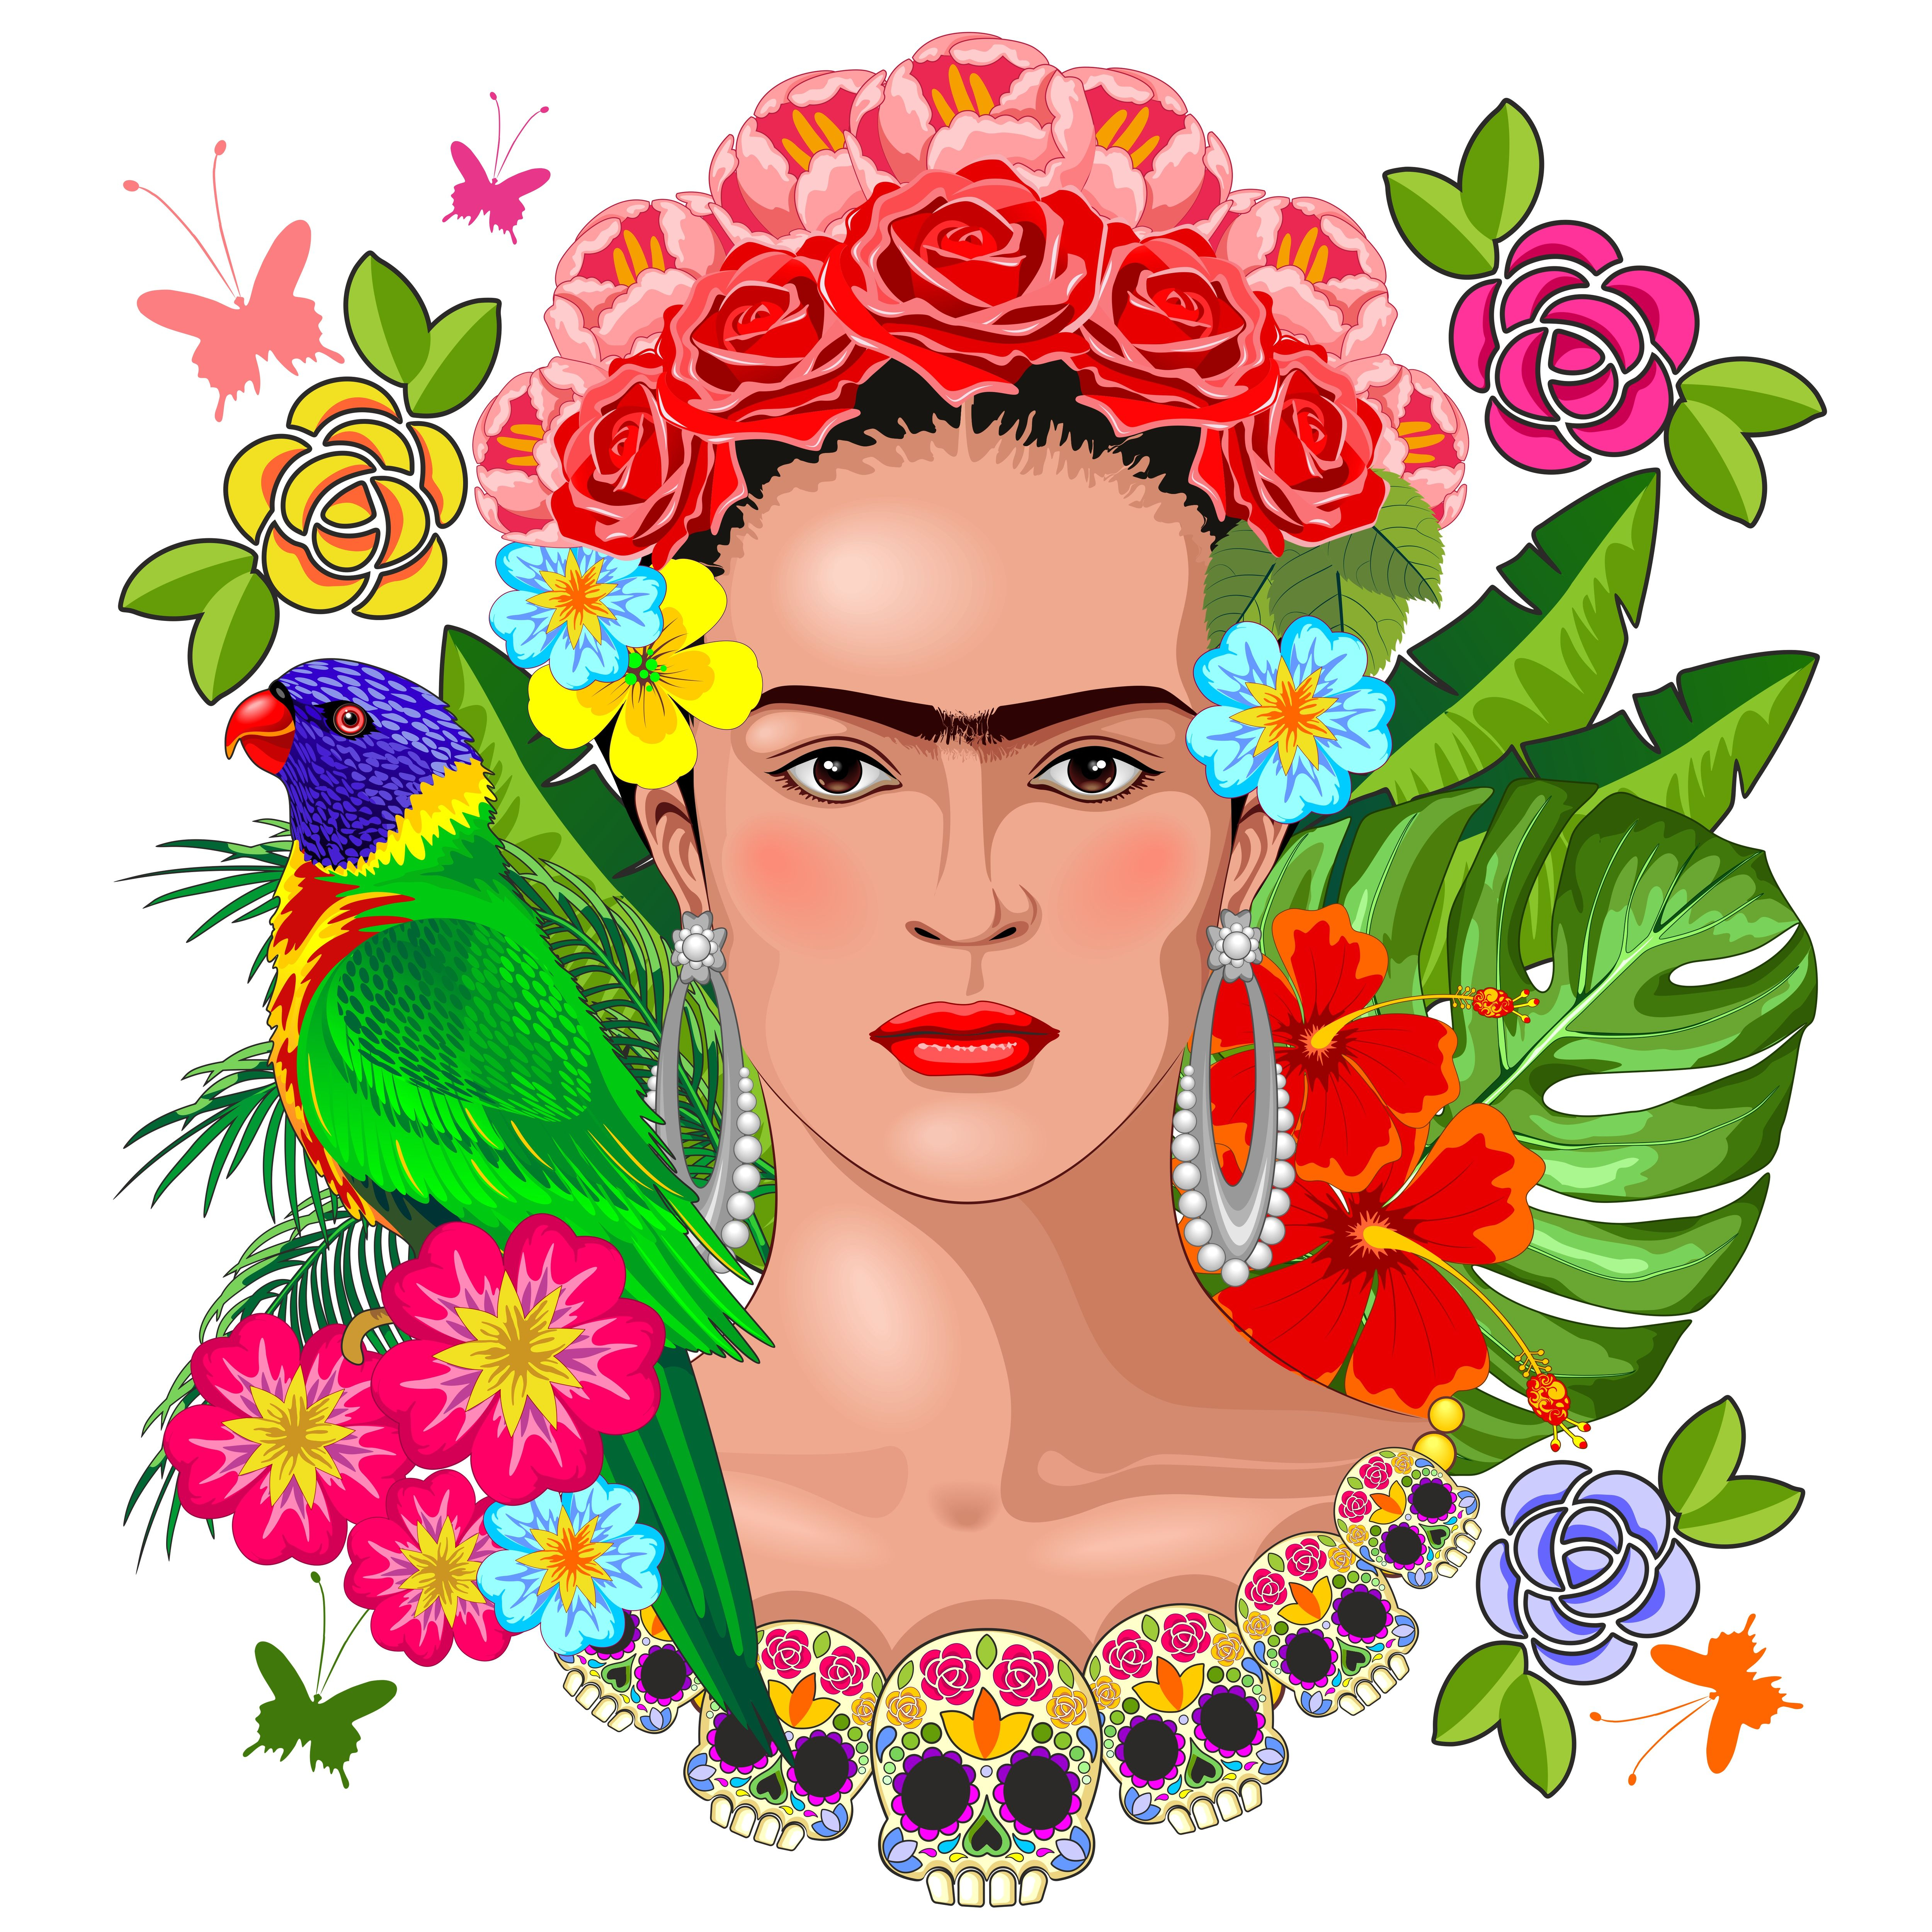 ‘I think that little by little, I’ll be able to solve my problems and survive’ – Frida Kahlo